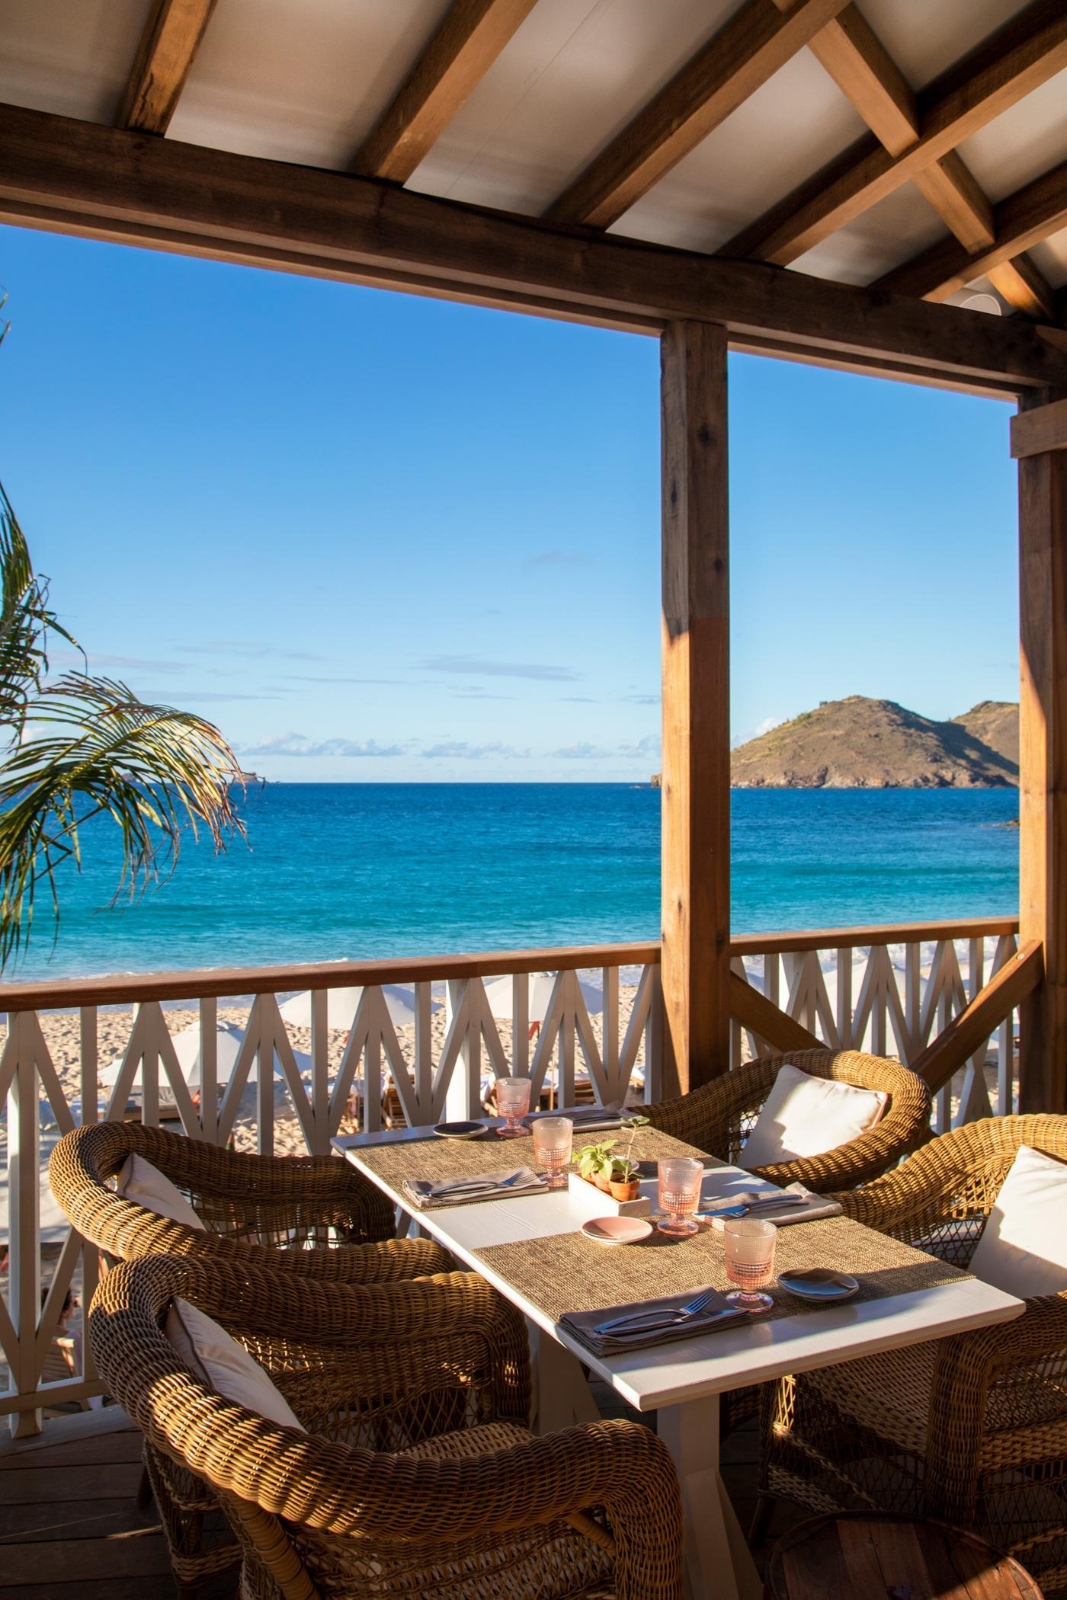 Hotel Cheval Blanc St-Barth Isle de France - Tres Cantos - Great prices at  HOTEL INFO